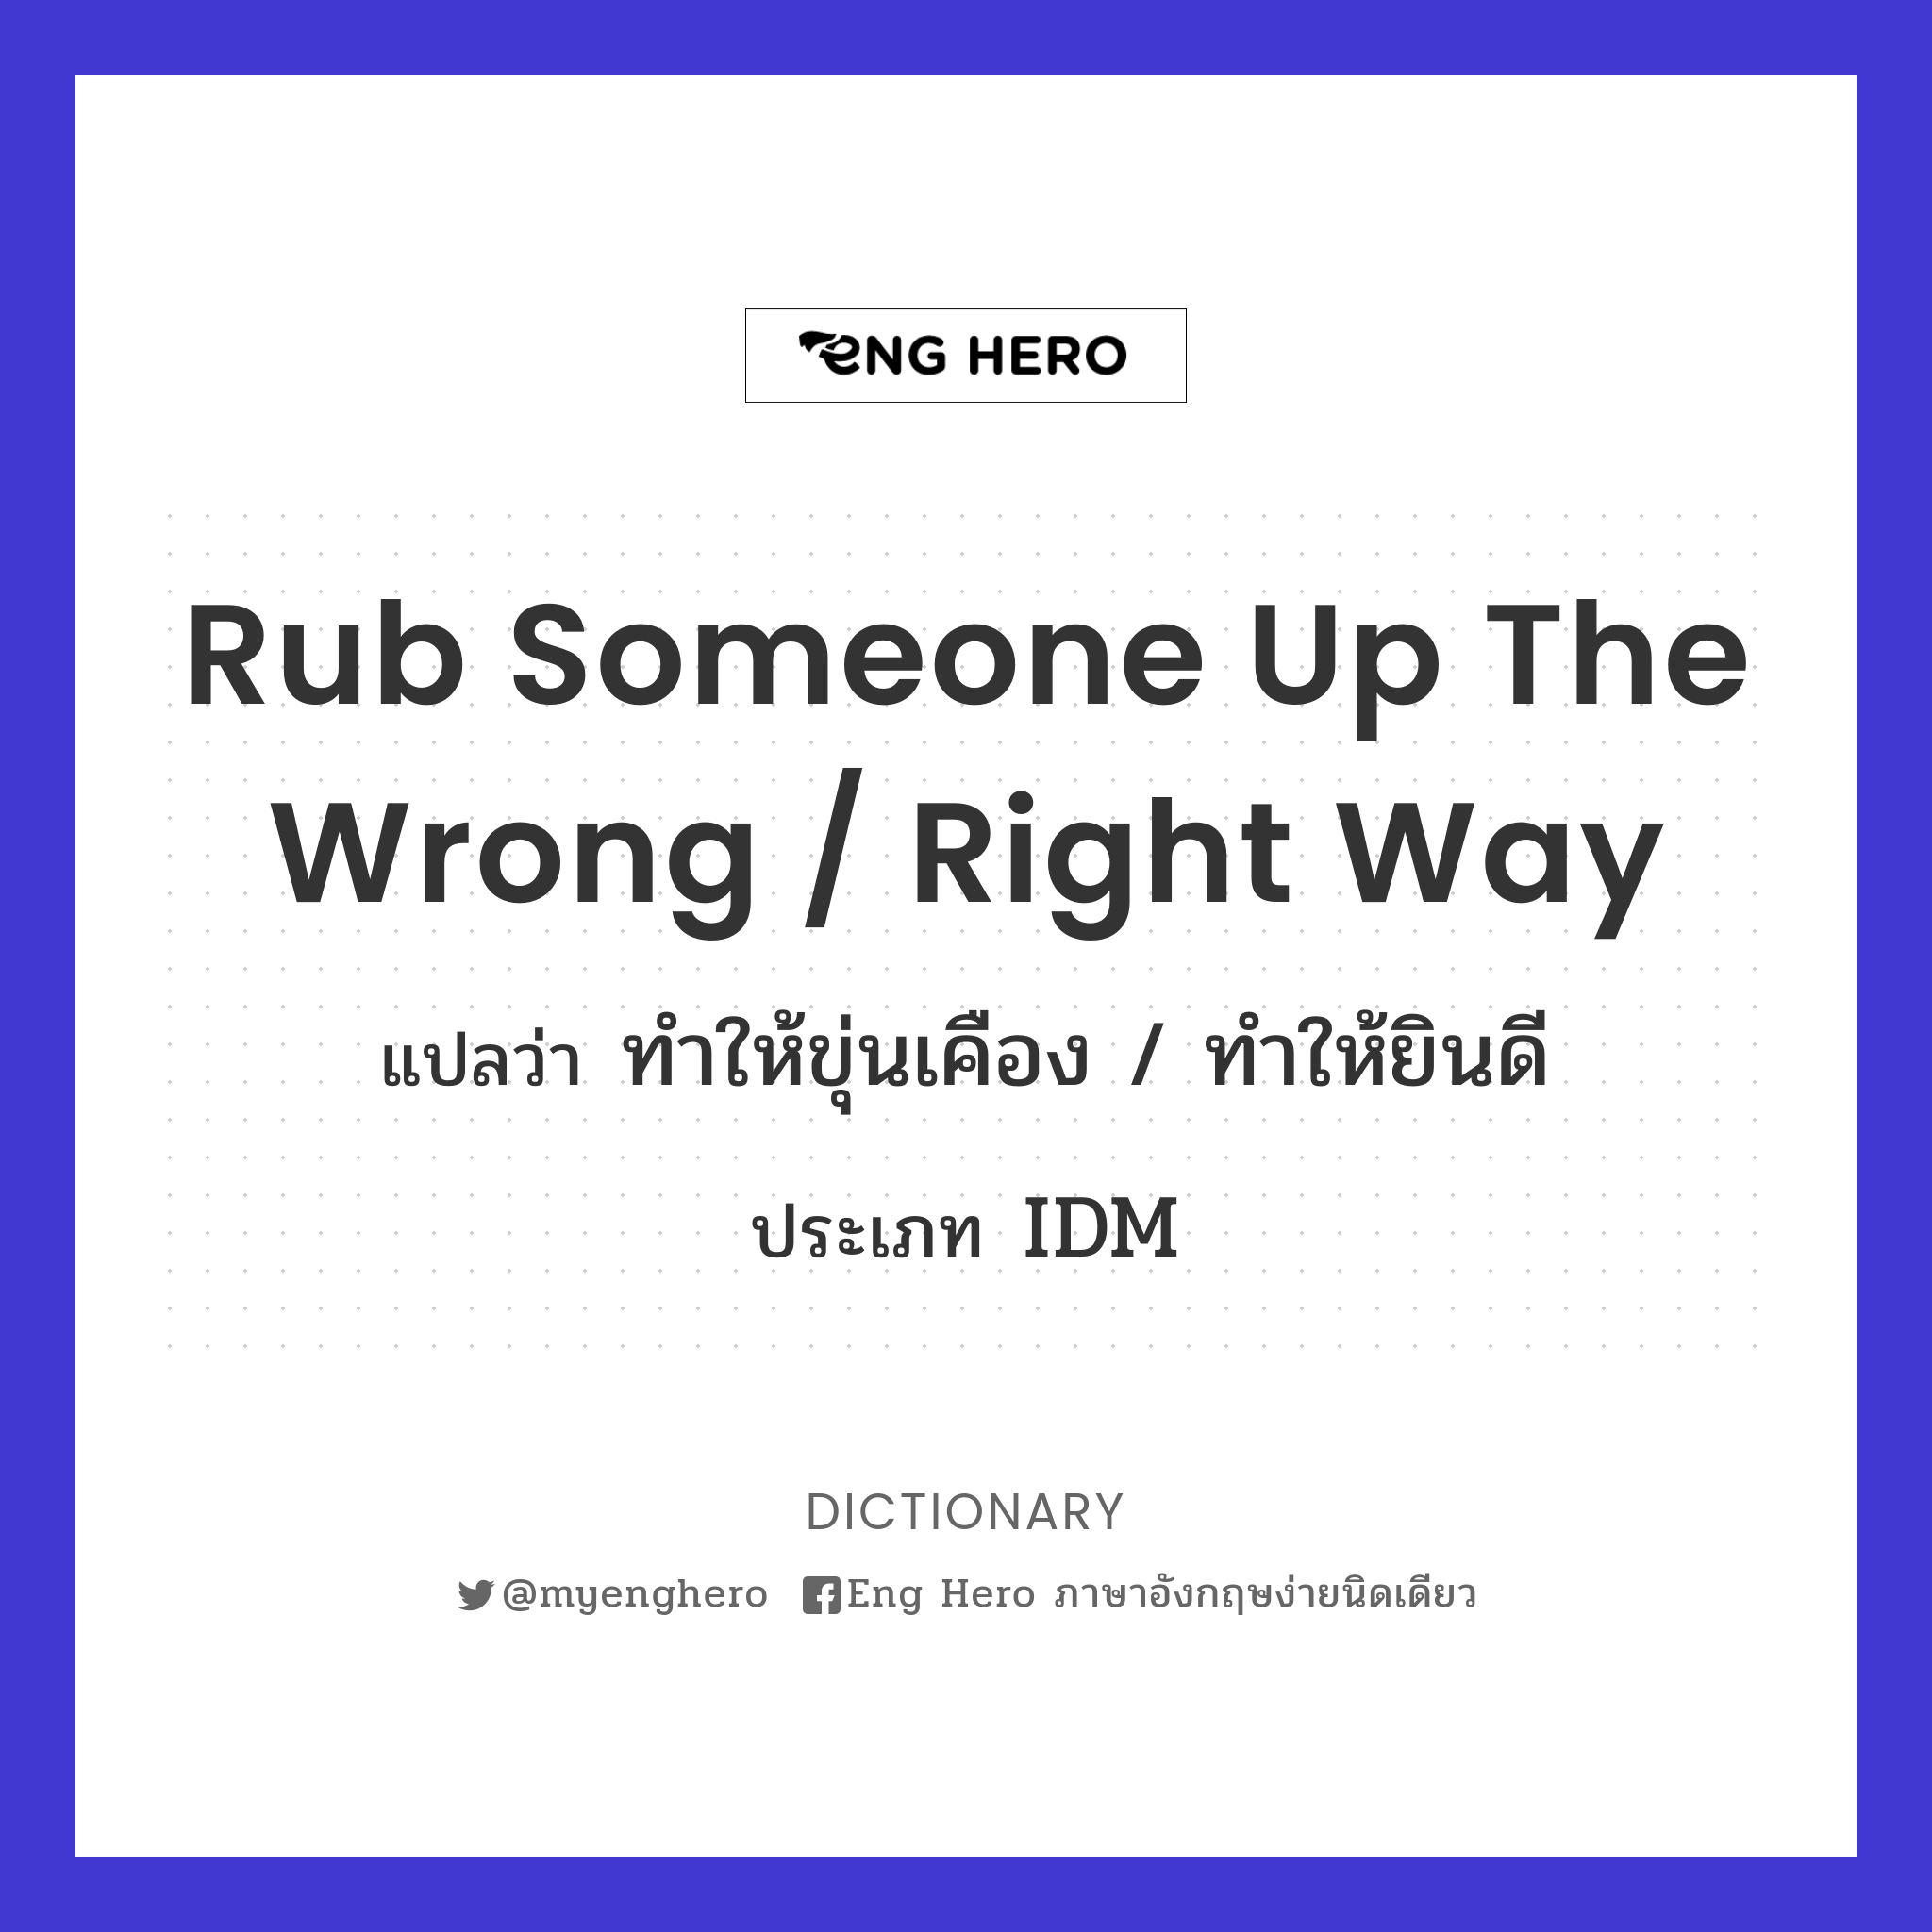 rub someone up the wrong / right way